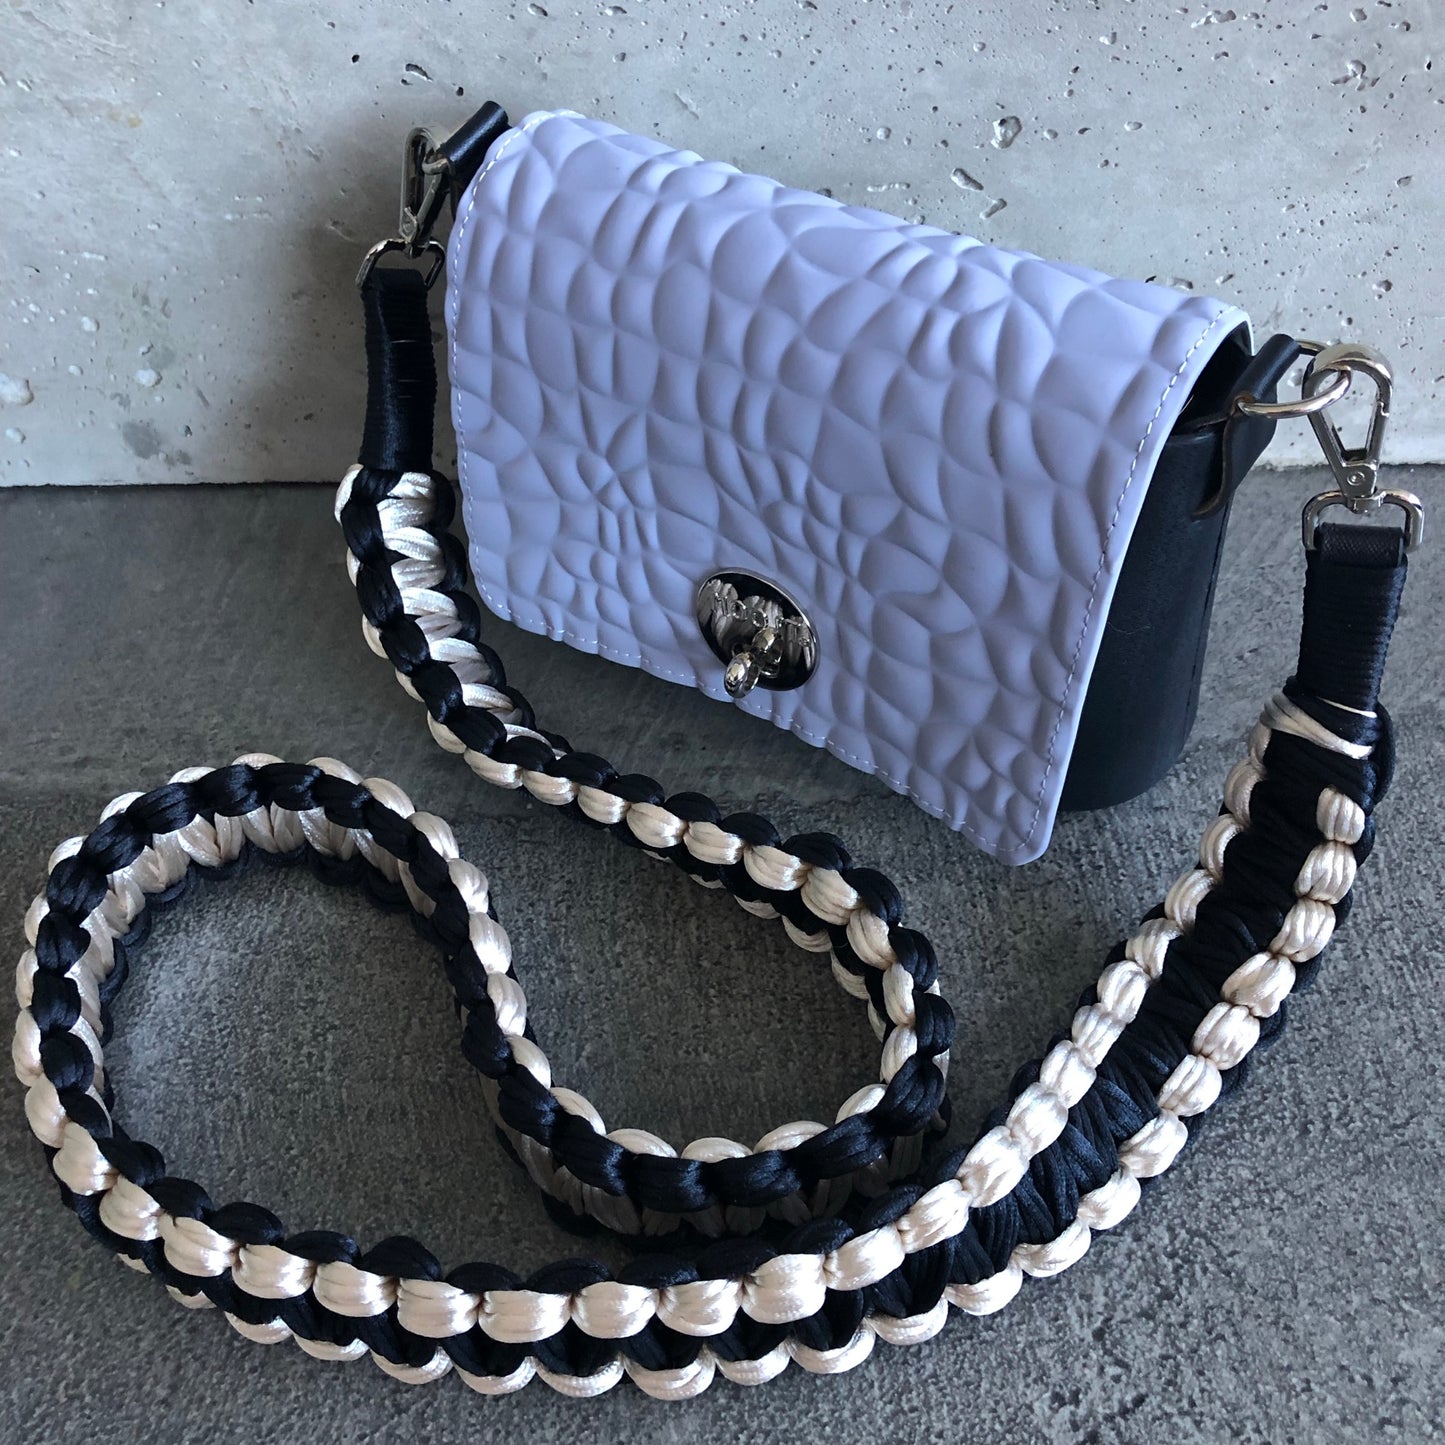 Periwinkle on Black with Showstopper Strap